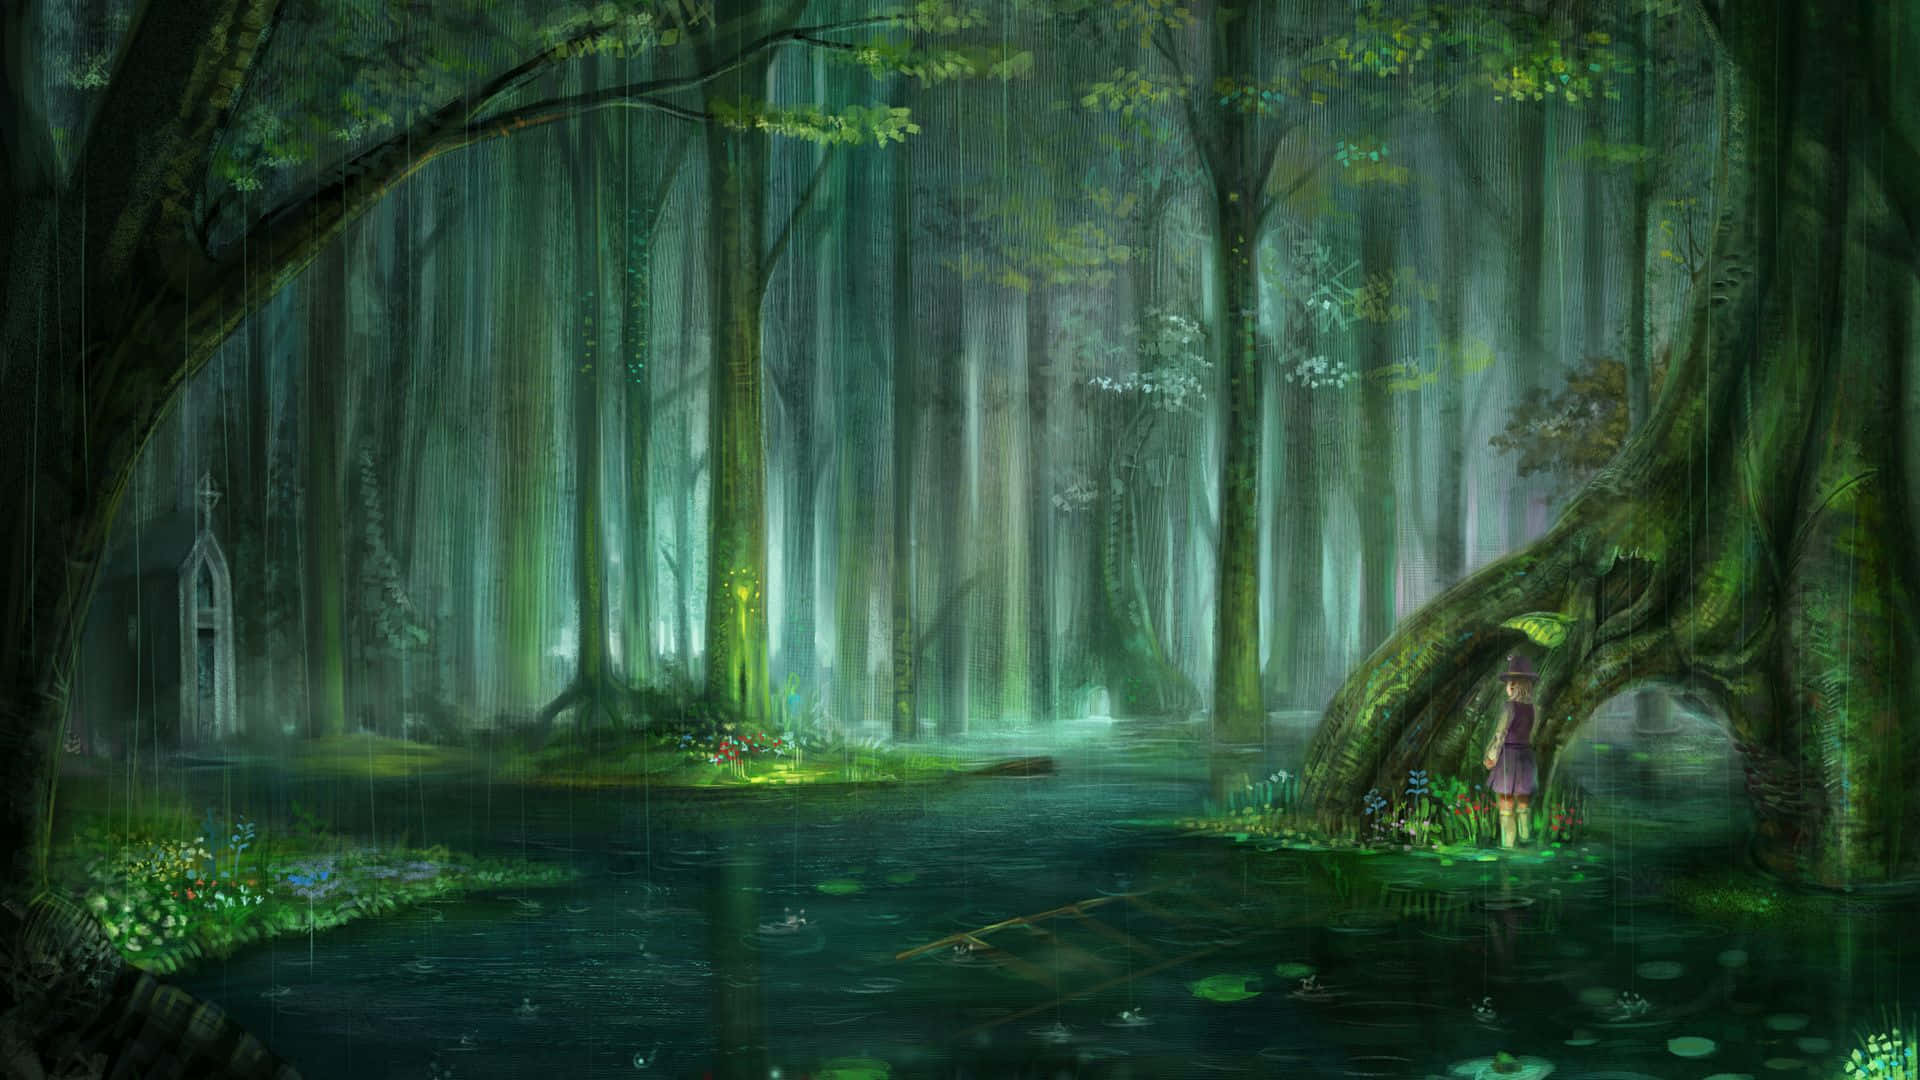 "A tranquil escape into the Anime Forest" Wallpaper